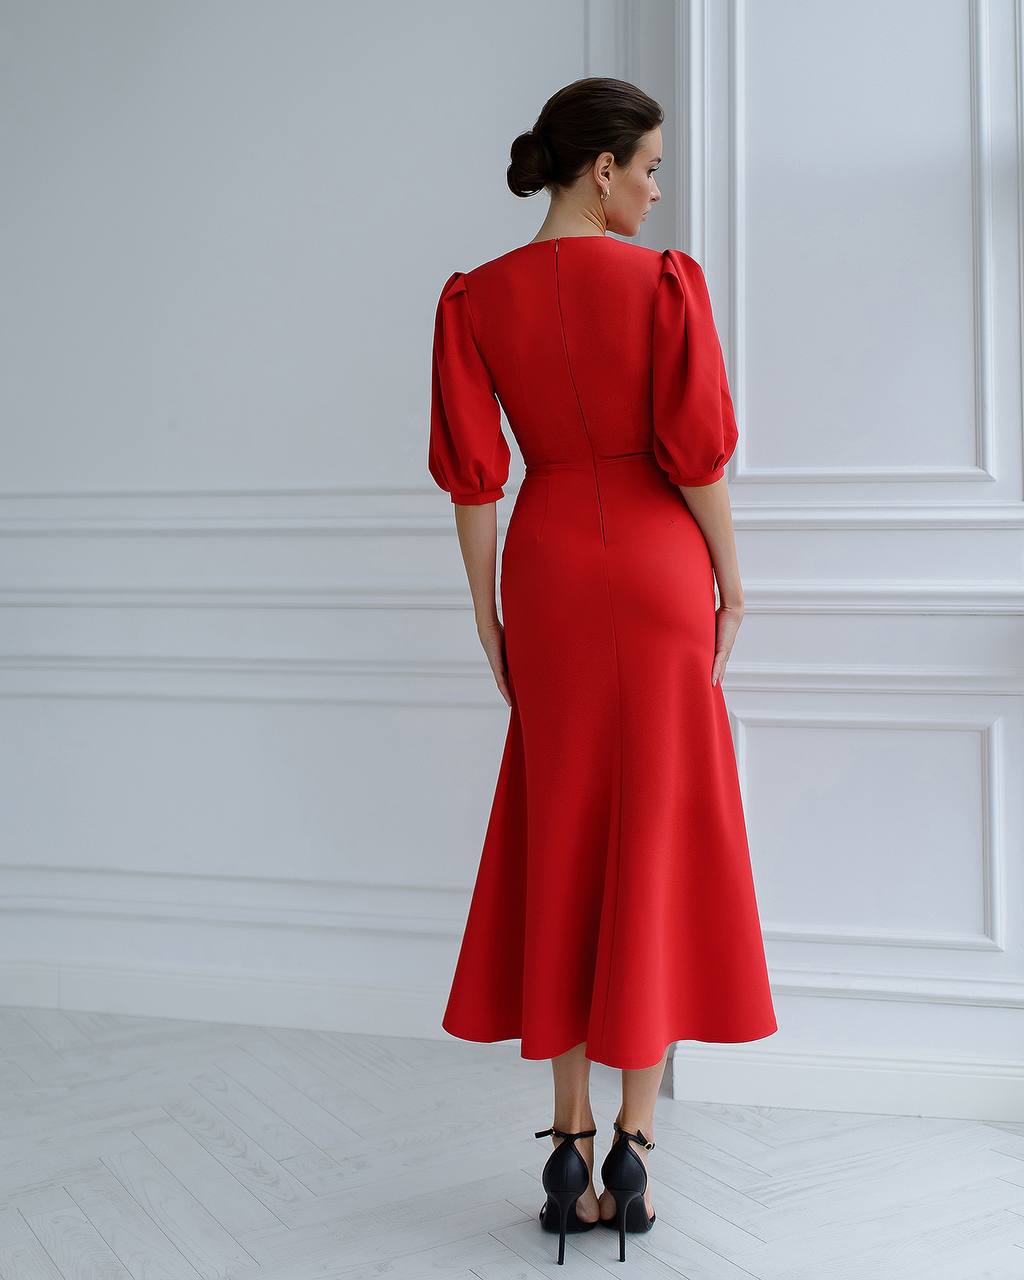 a woman in a red dress stands in front of a white wall